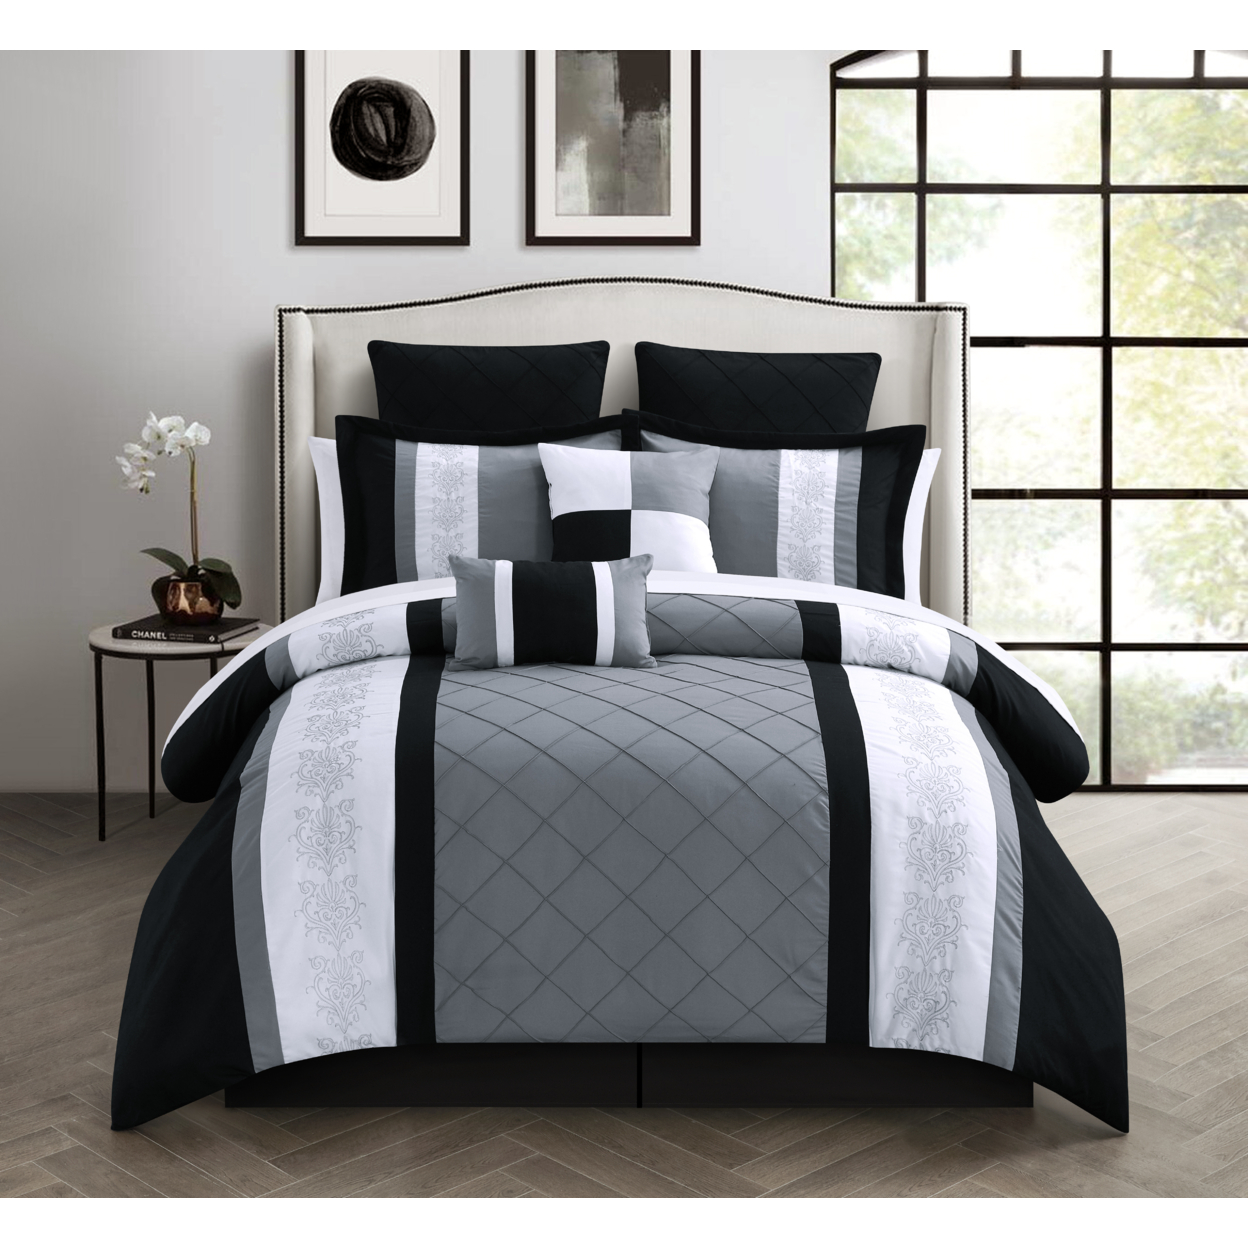 Livingston Oversized And Overfilled Comforter Set (8-Piece) - Black, Queen